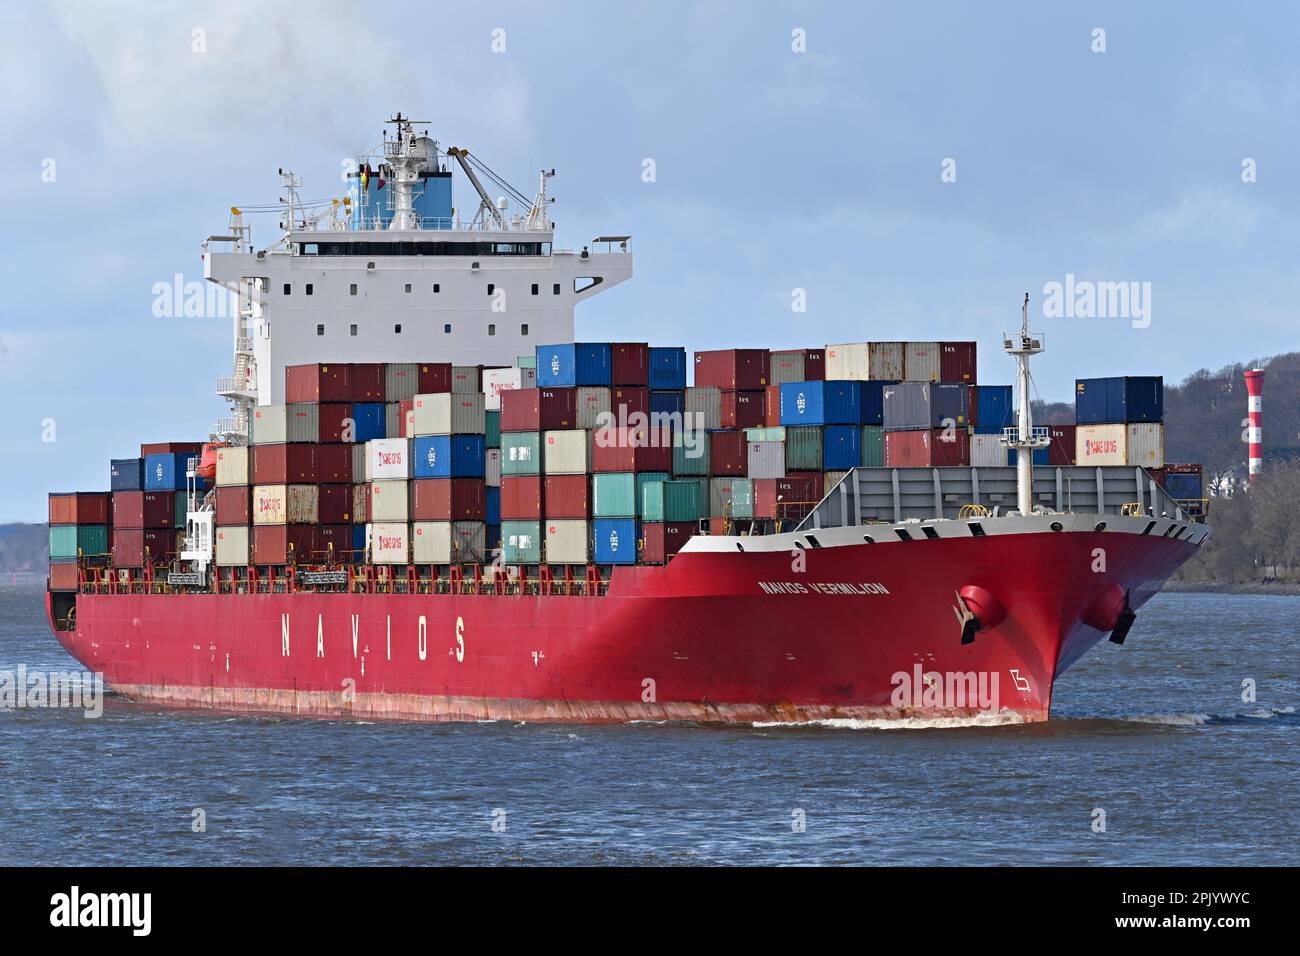 Containership NAVIOS VERMILION arrives at the port of Hamburg Stock Photo